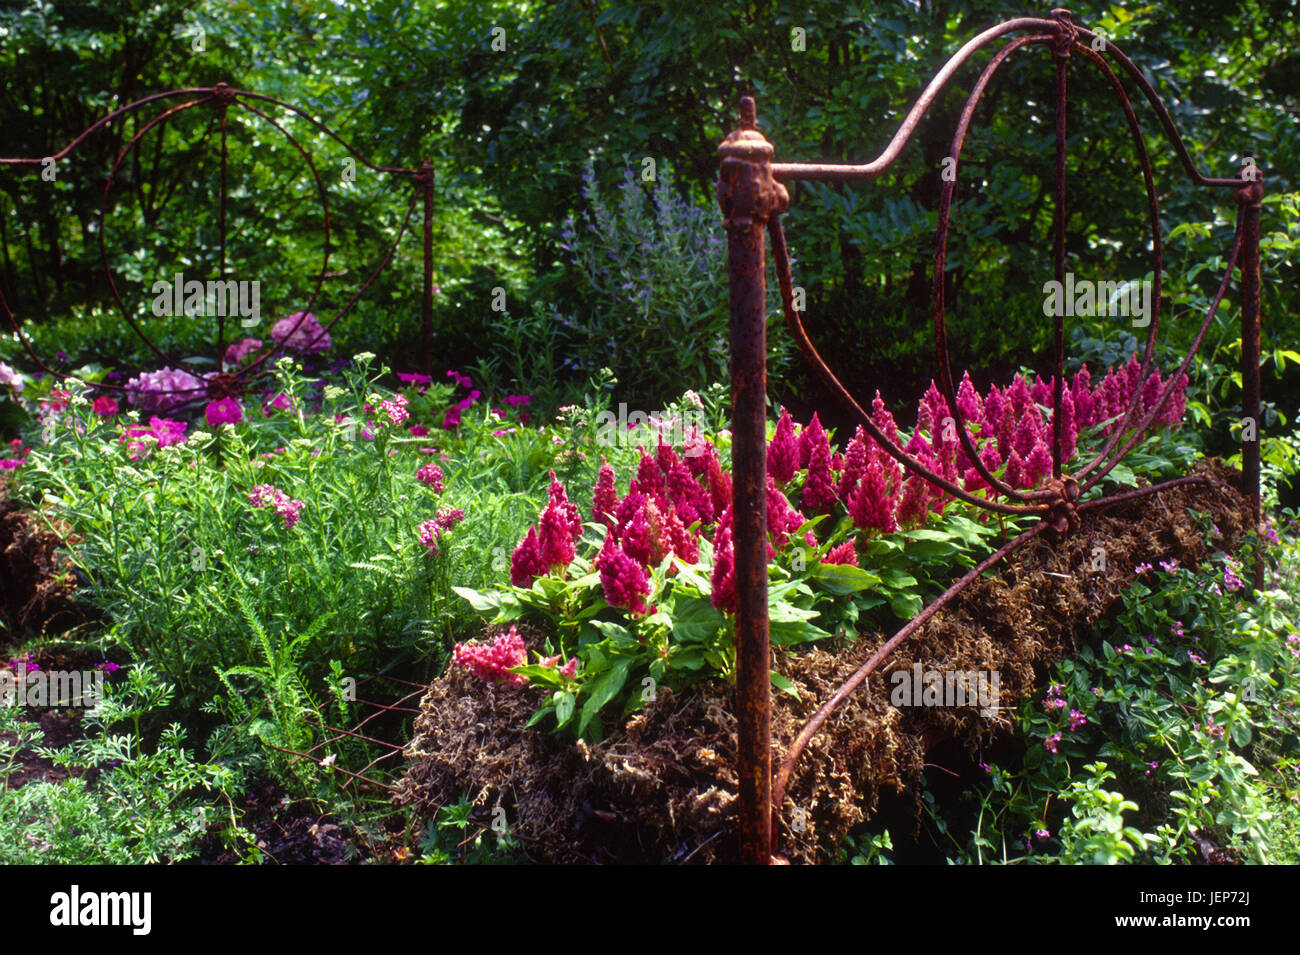 Flea market garden with iron bed or flowers Stock Photo